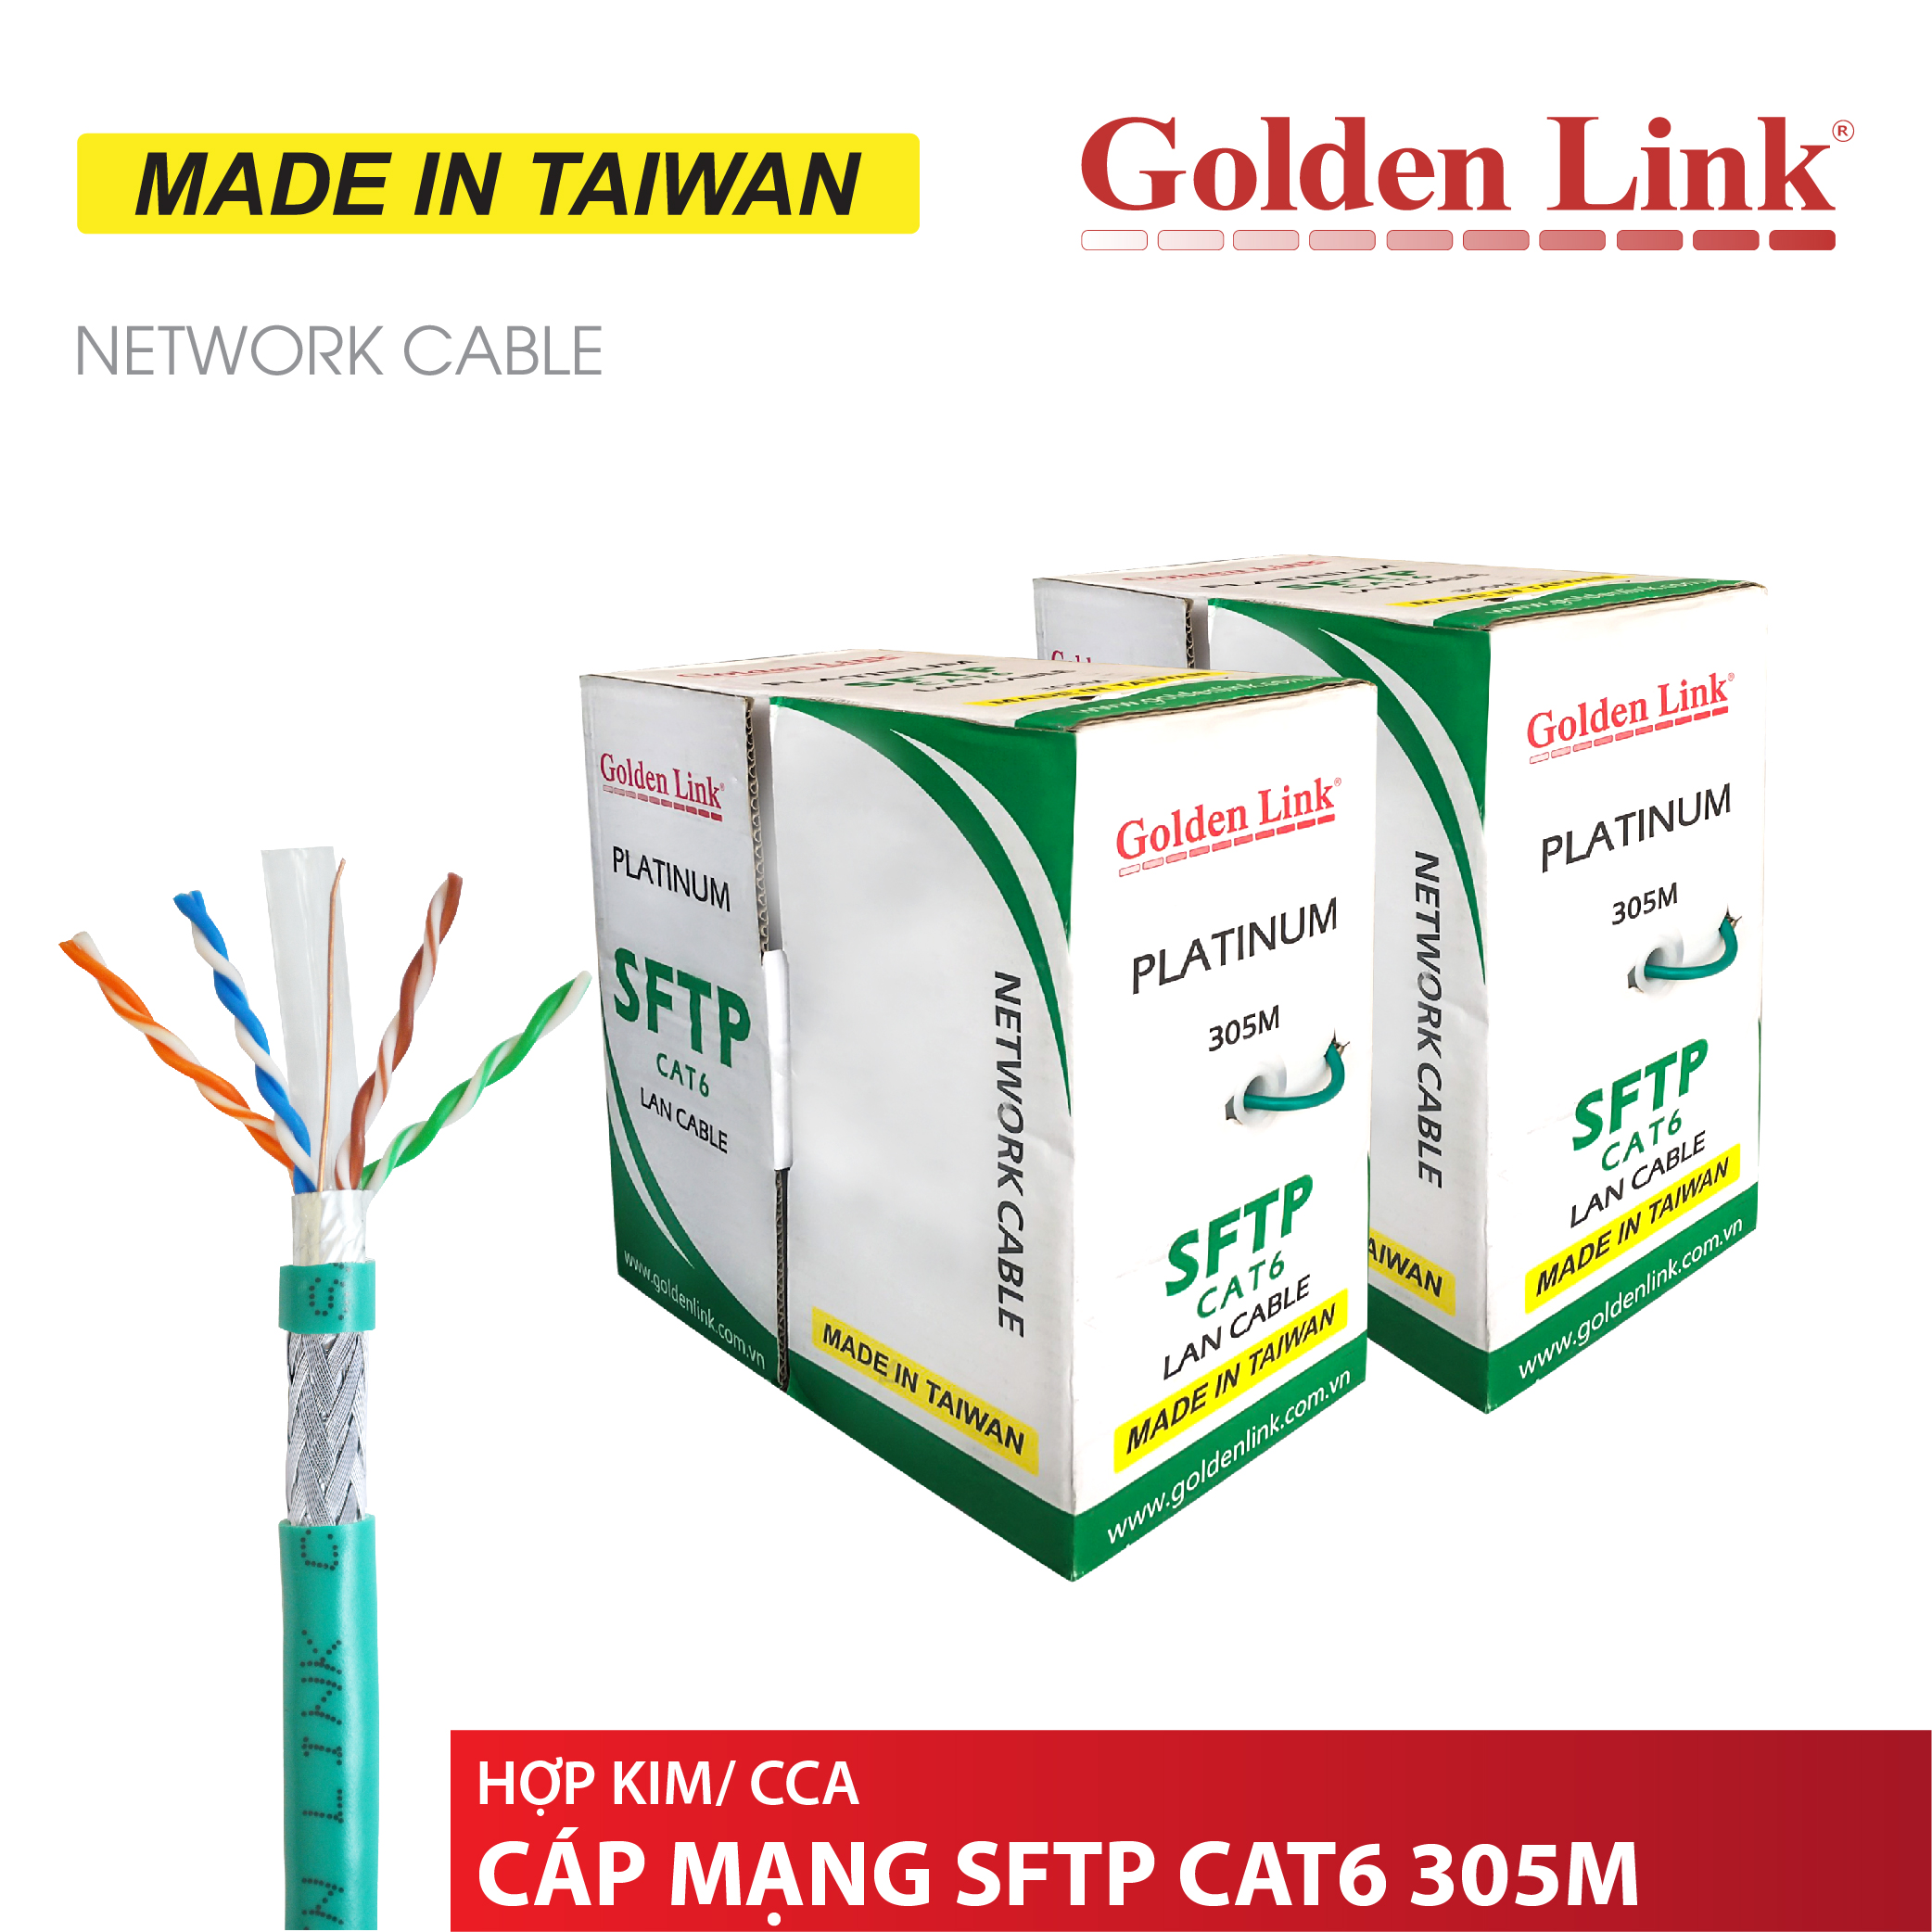 Golden Link Platinum SFTP Cat 6 network cable Made in Taiwan